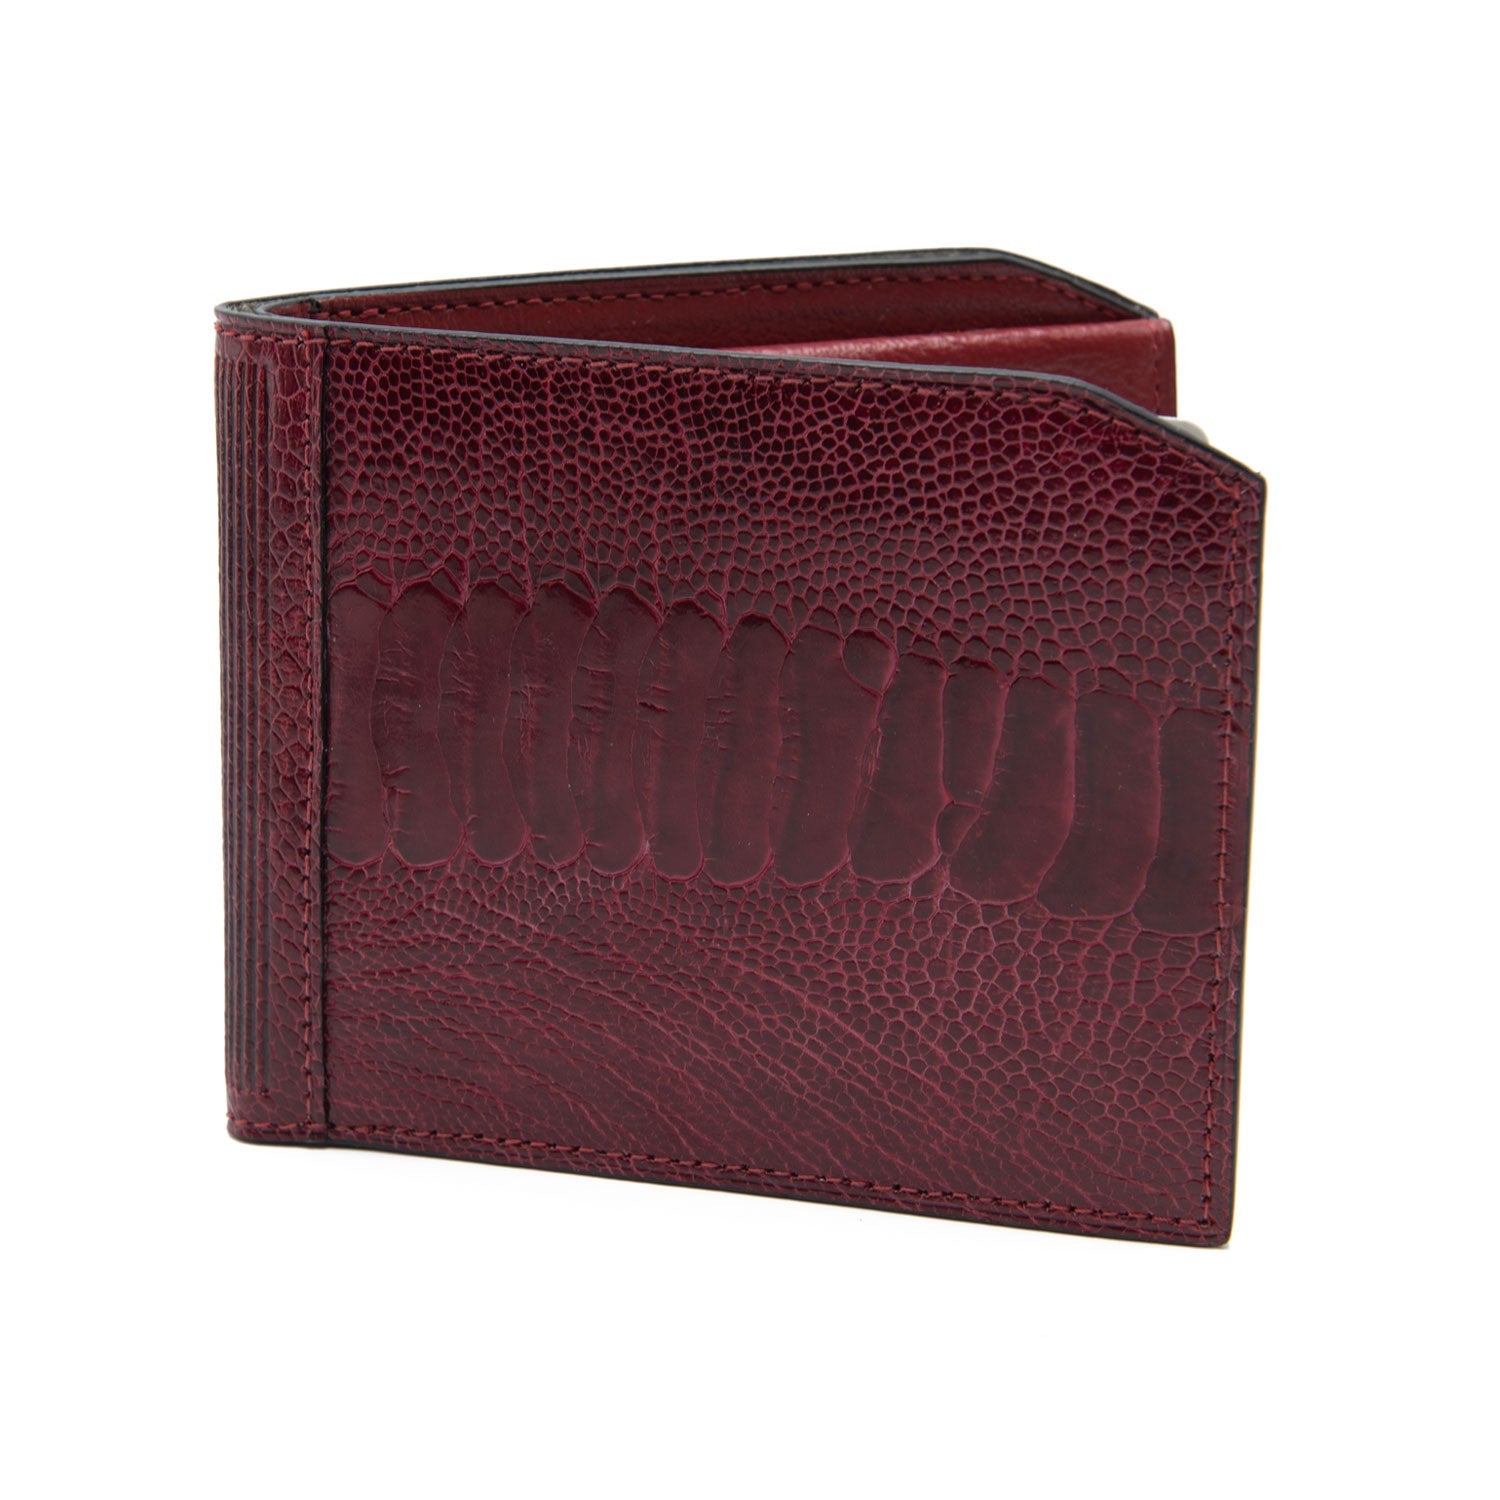 Sante Fe Ostrich Shin Leather Bill &amp; Coin Wallet - Ostrich Leather Wallet